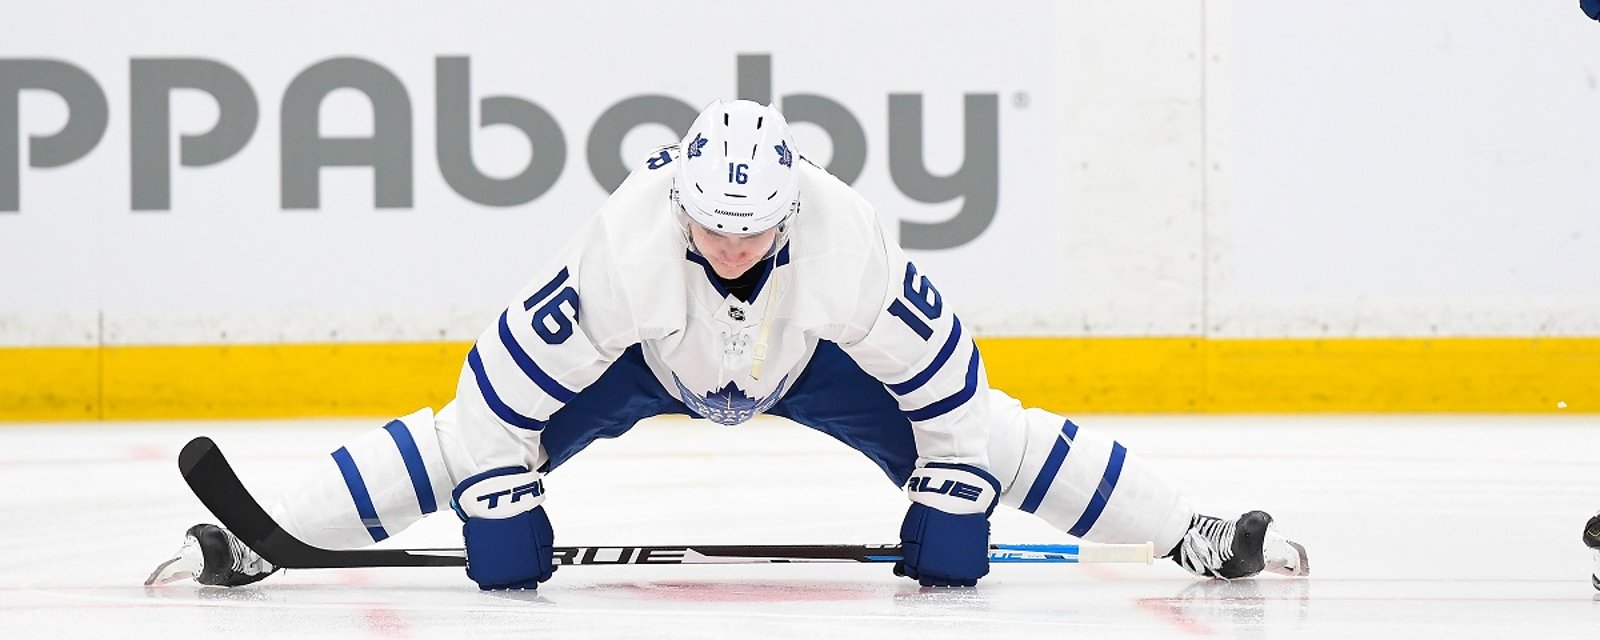 Big update on Mitch Marner from Leafs' Monday morning practice.